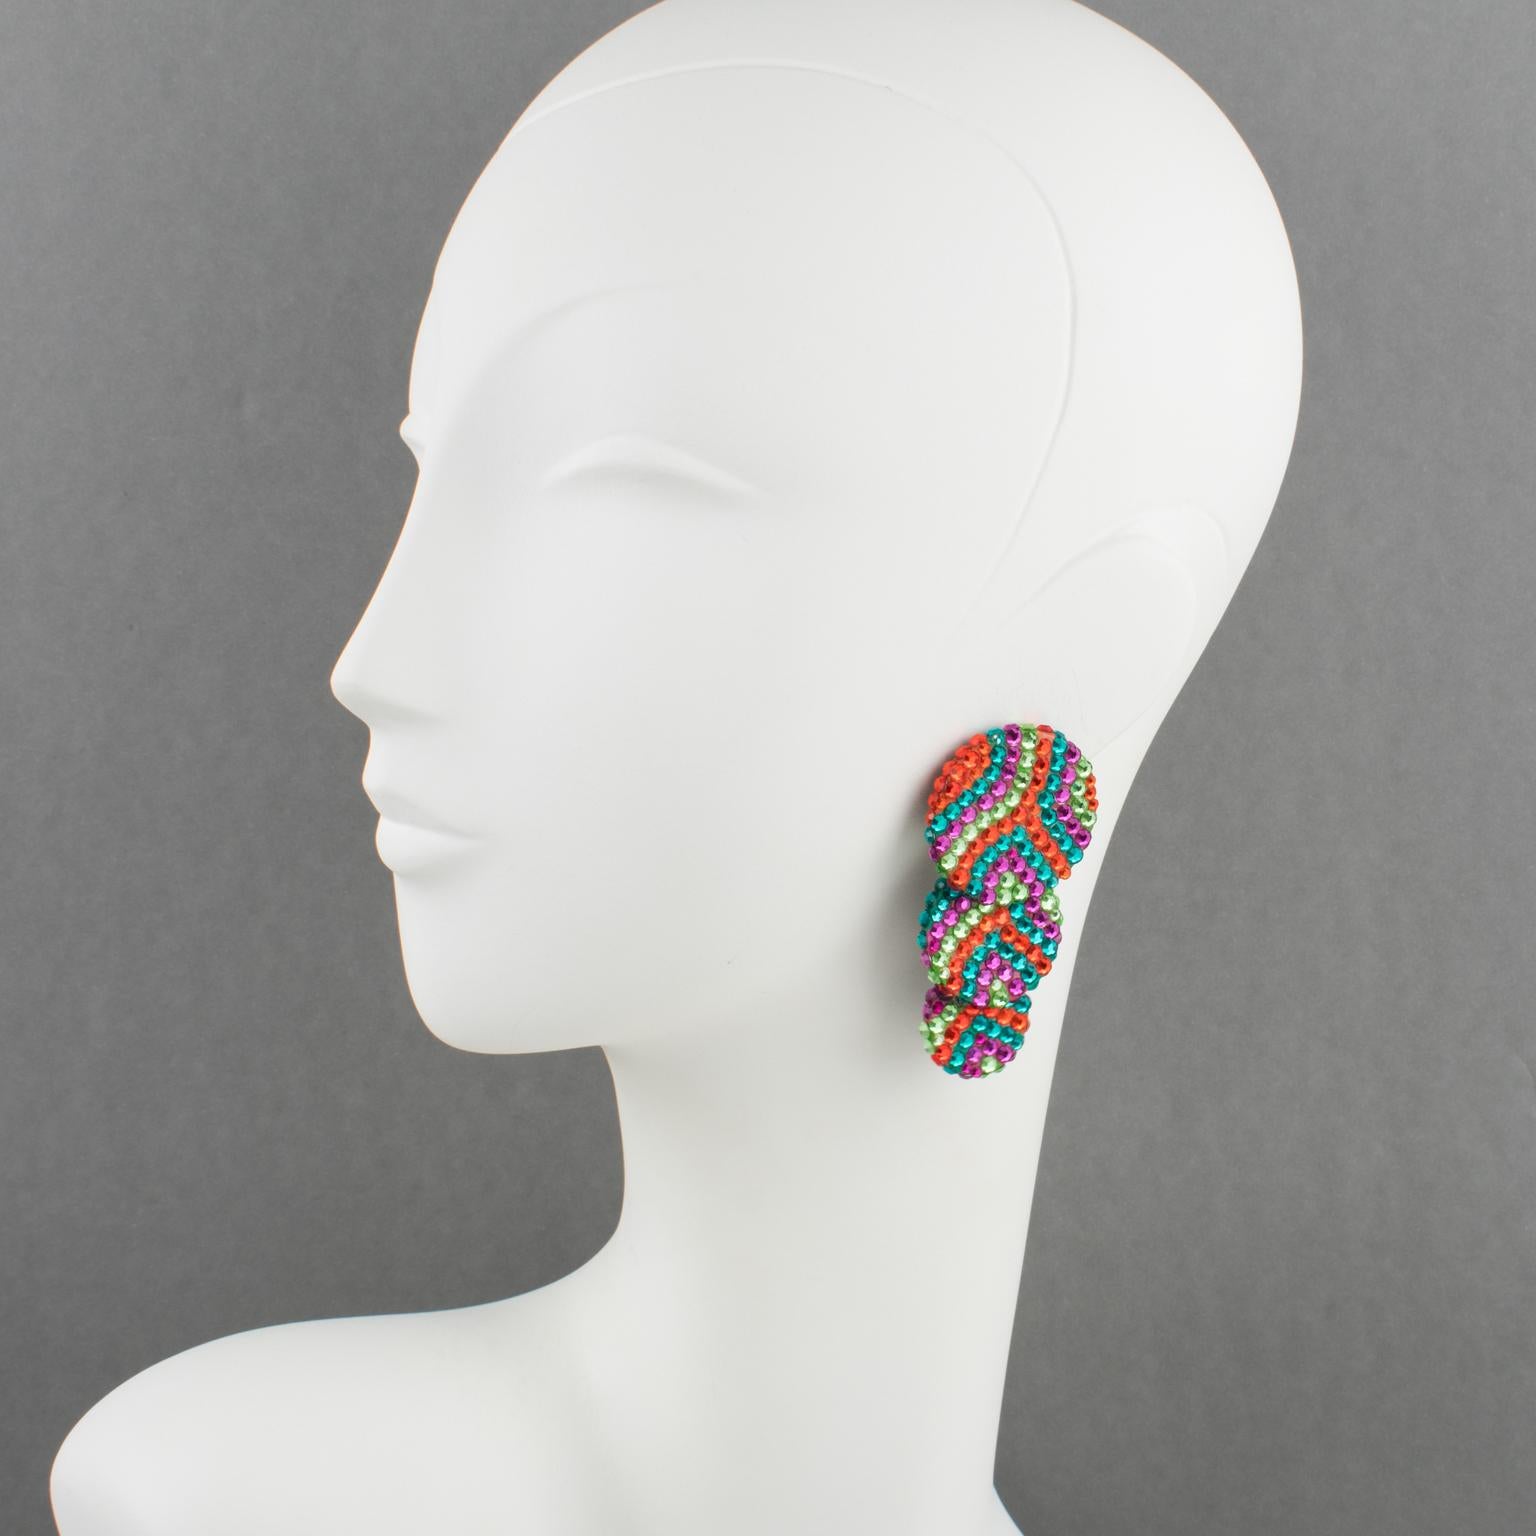 These lovely statements clip-on earrings were designed by Richard Kerr in the 1980s. They are made up of his signature pave rhinestones and feature cascading graduated disk shapes, all covered with colorful crystal rhinestones on a black resin